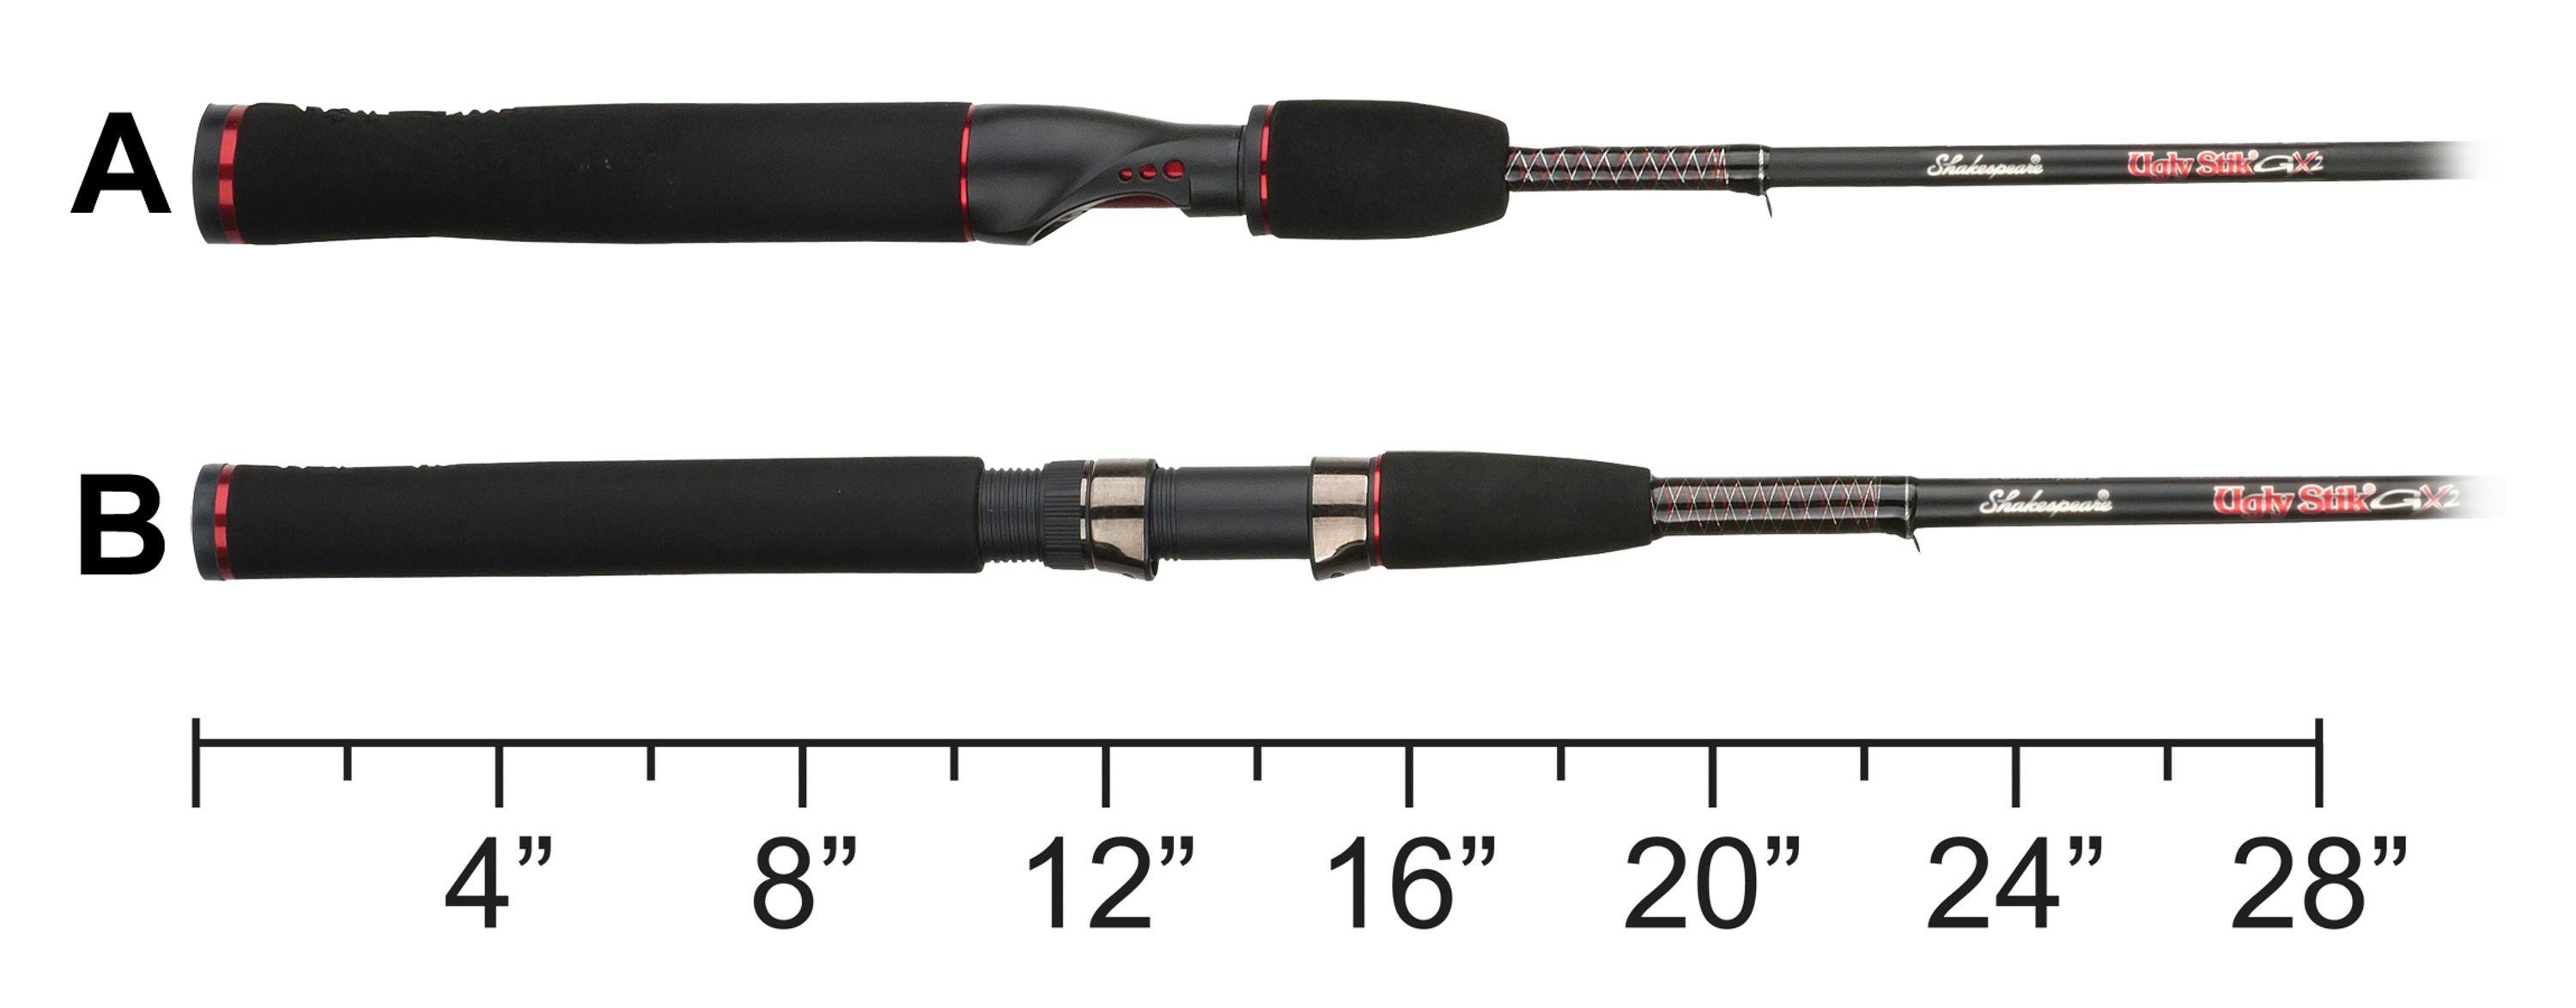 Shakespeare Ugly stick review $18 #fishing #bass #uglystick #shakespea, Bass Fishing